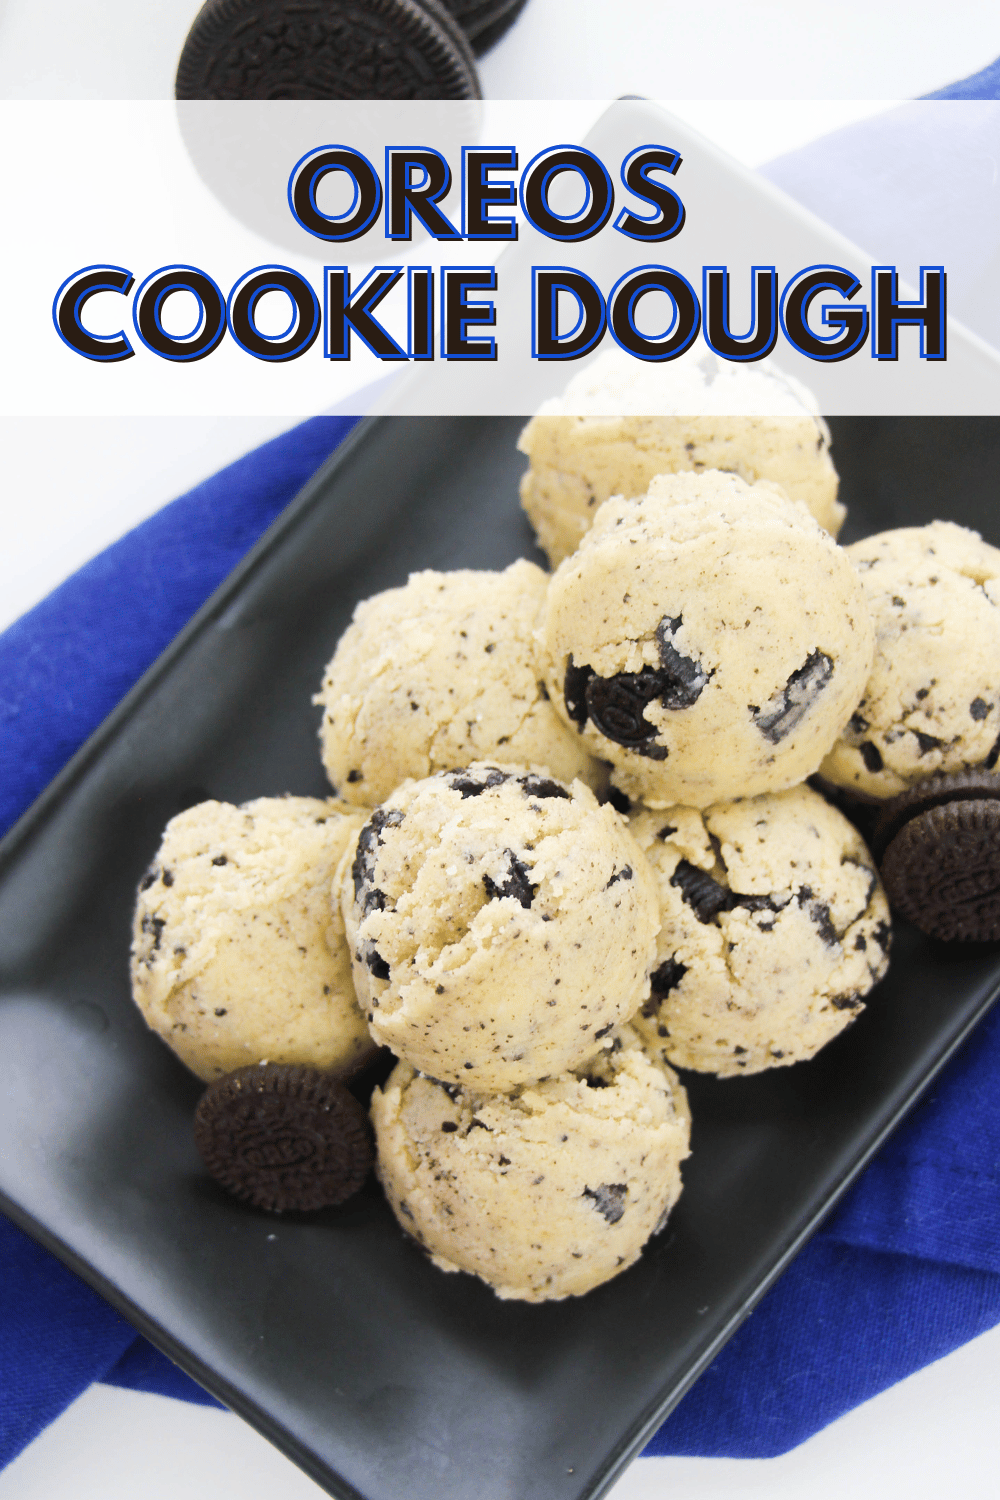 This Oreos Cookie Dough is made with a sweet and salty combination of Oreo crumbs and cookie dough making it the perfect dessert or snack! #oreocookiedough #oreoscookiedough #ediblecookiedough #oreos #cookiedough via @wondermomwannab